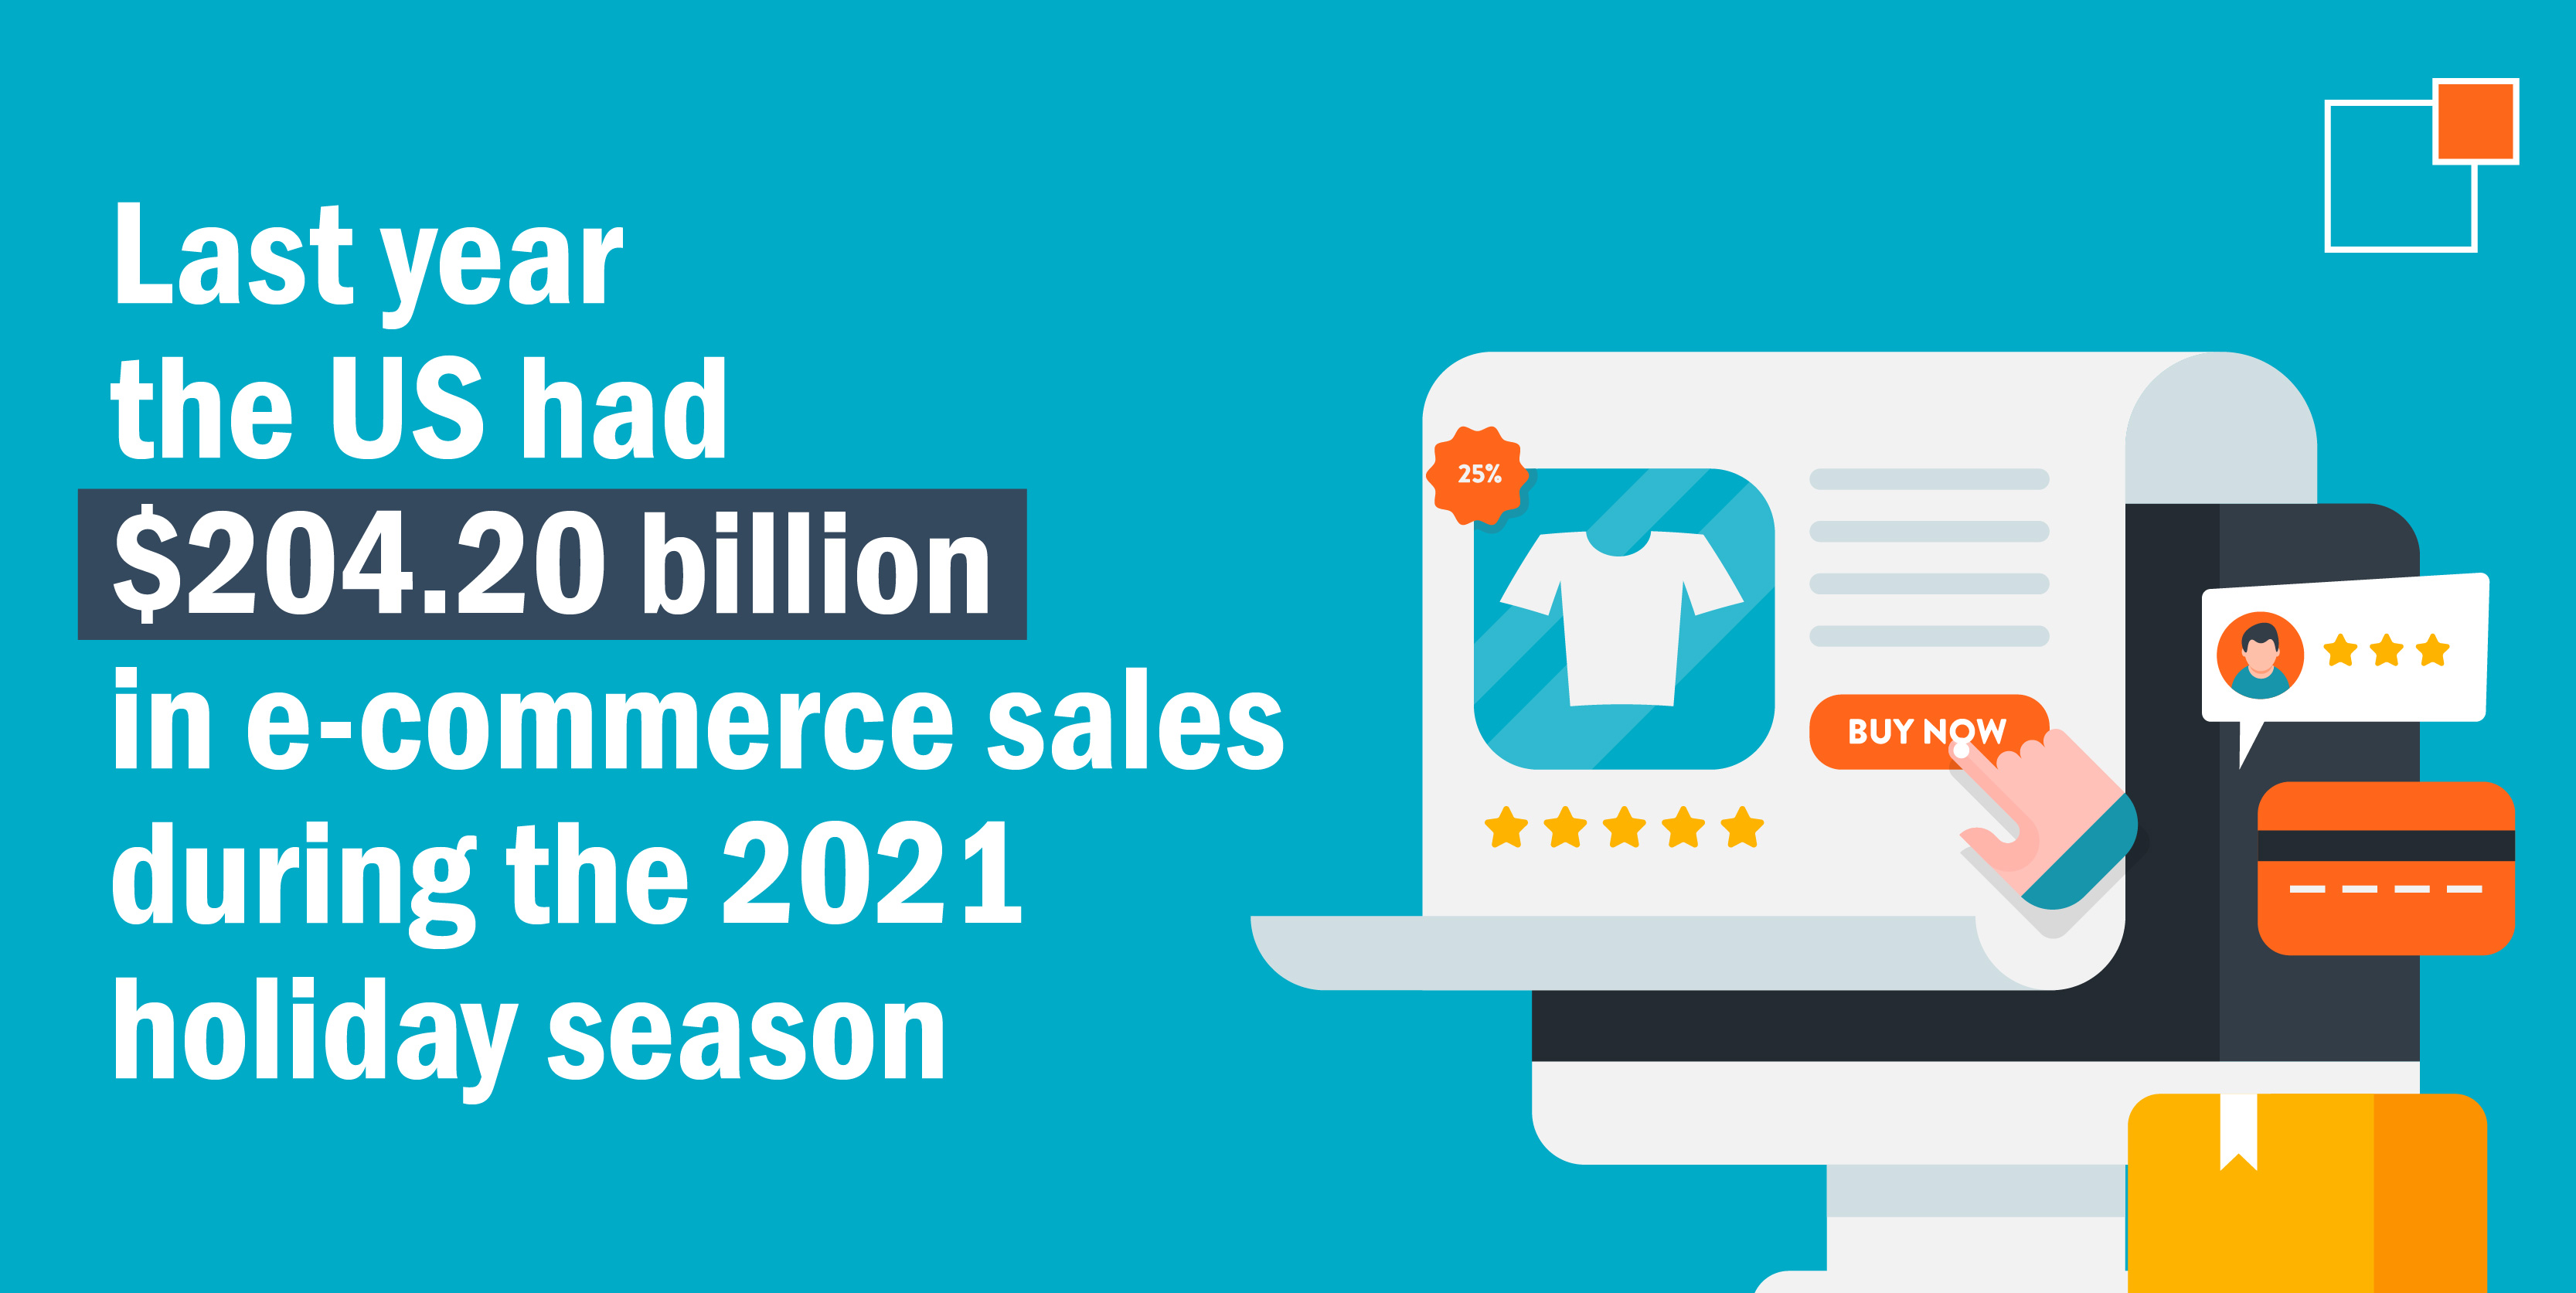 Last year the US has $204.20 billion in e-commerce sales during the 2021 holiday season.